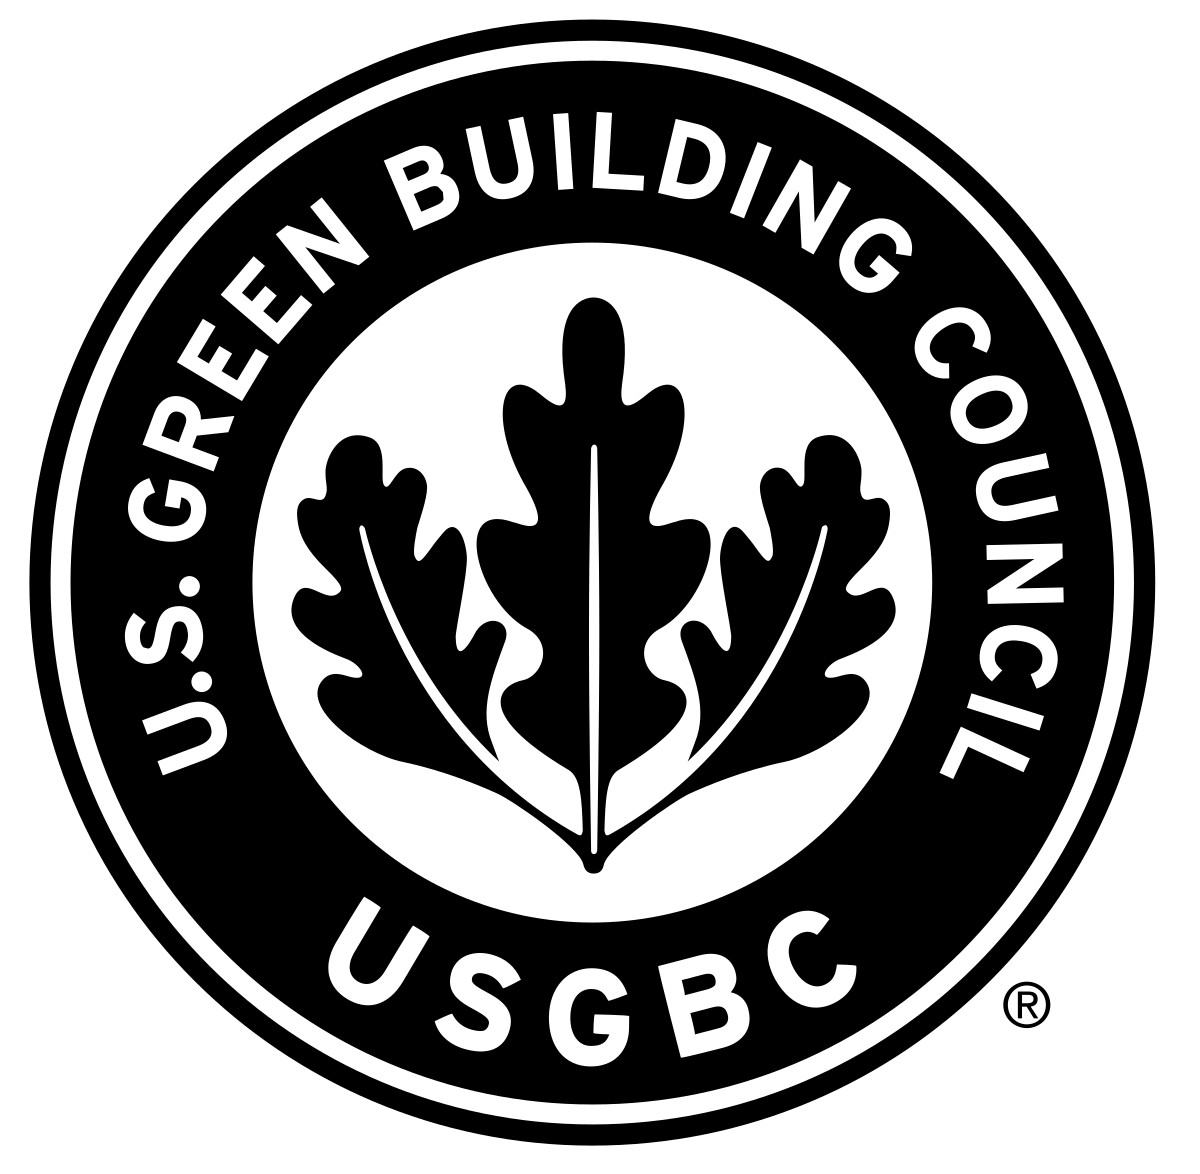 United States Green Building Council Logo.